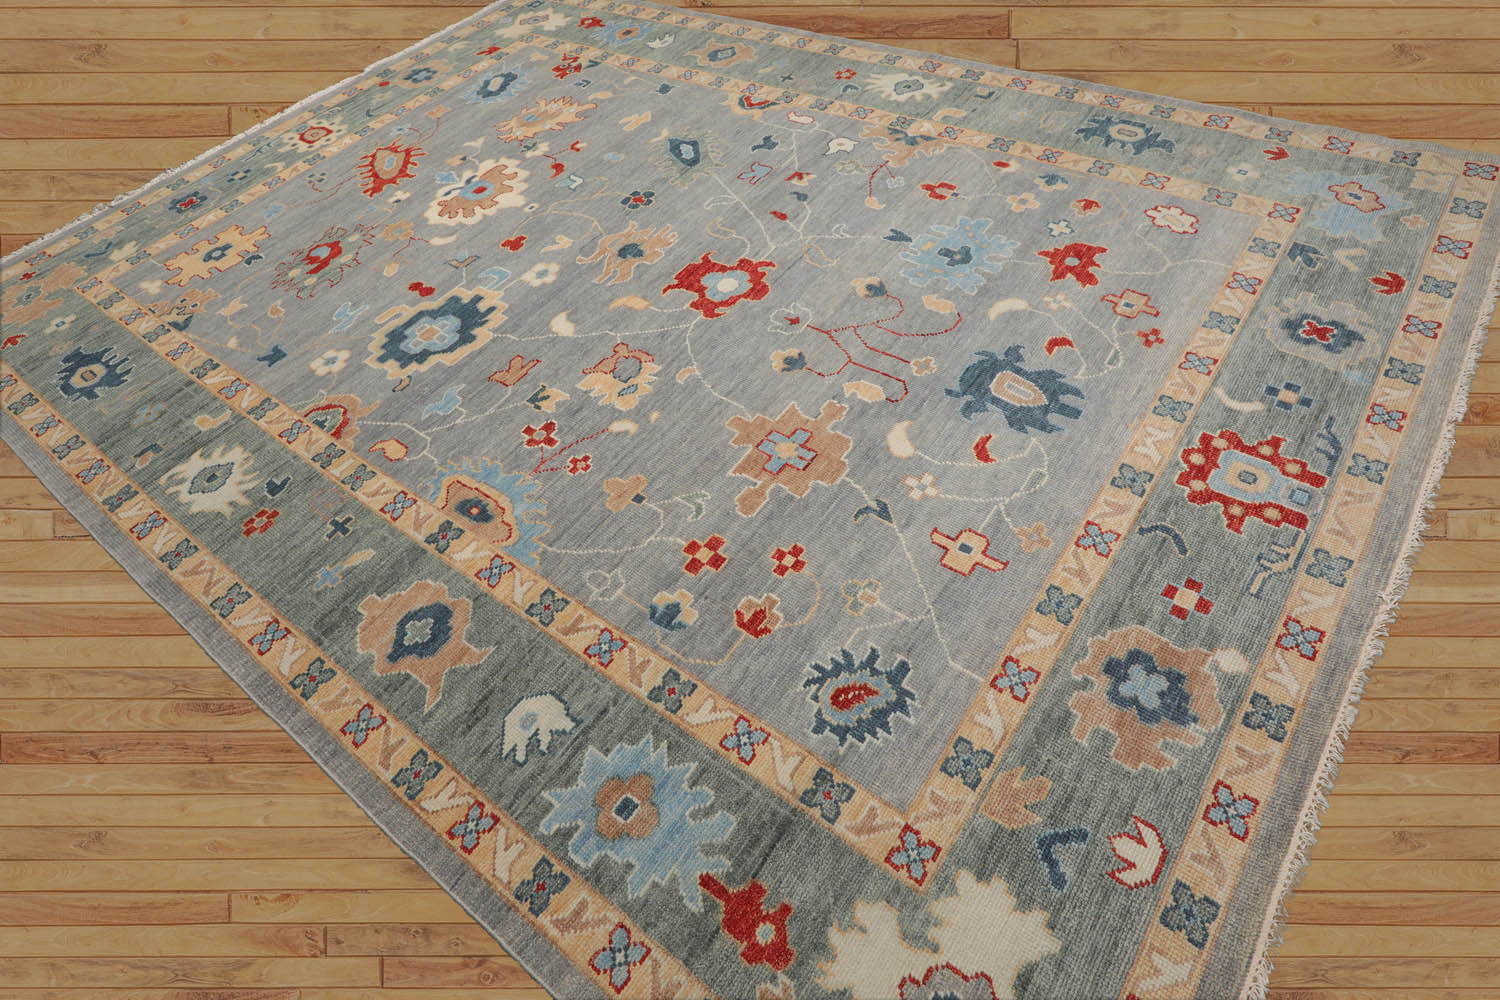 Annwyl 9x12 Slate,Celadon Hand Knotted All-Over Wool Oushak Arts & Crafts  Oriental Area Rug